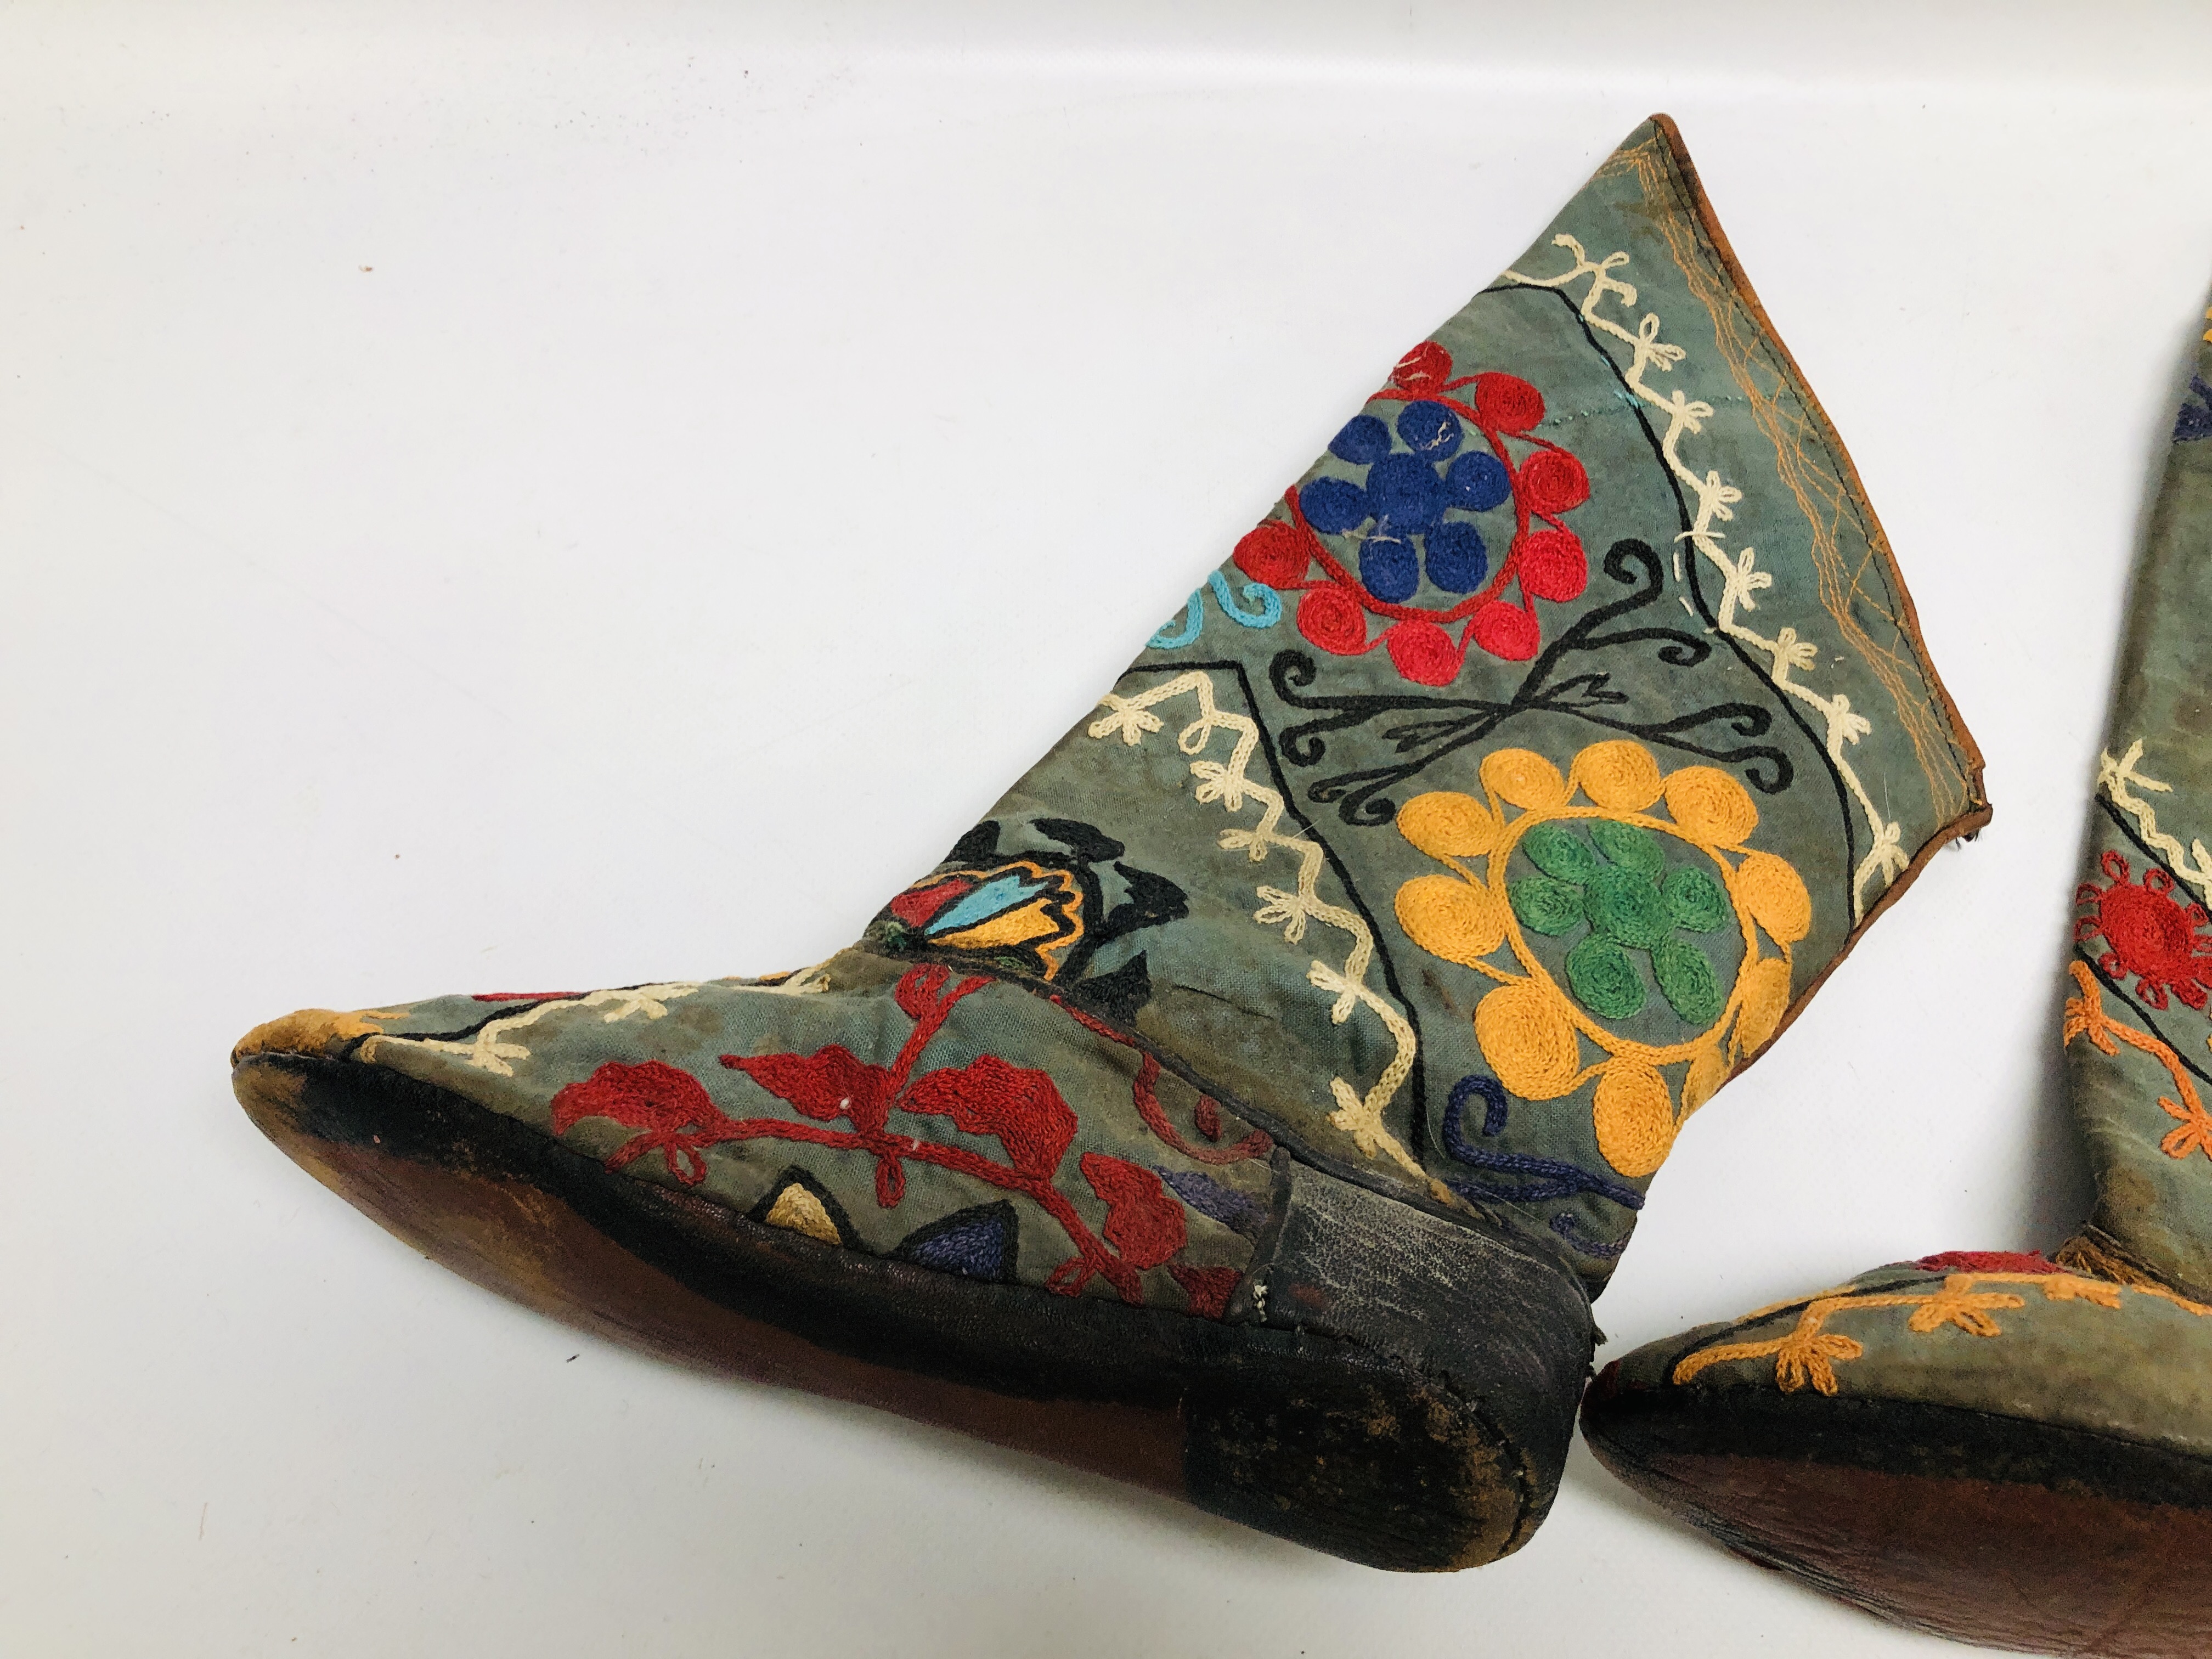 A PAIR OF MID C20TH AFGHAN EMBROIDERED SHOES ALONG WITH A PAIR OF EMBROIDERED BOOTS. - Image 9 of 10